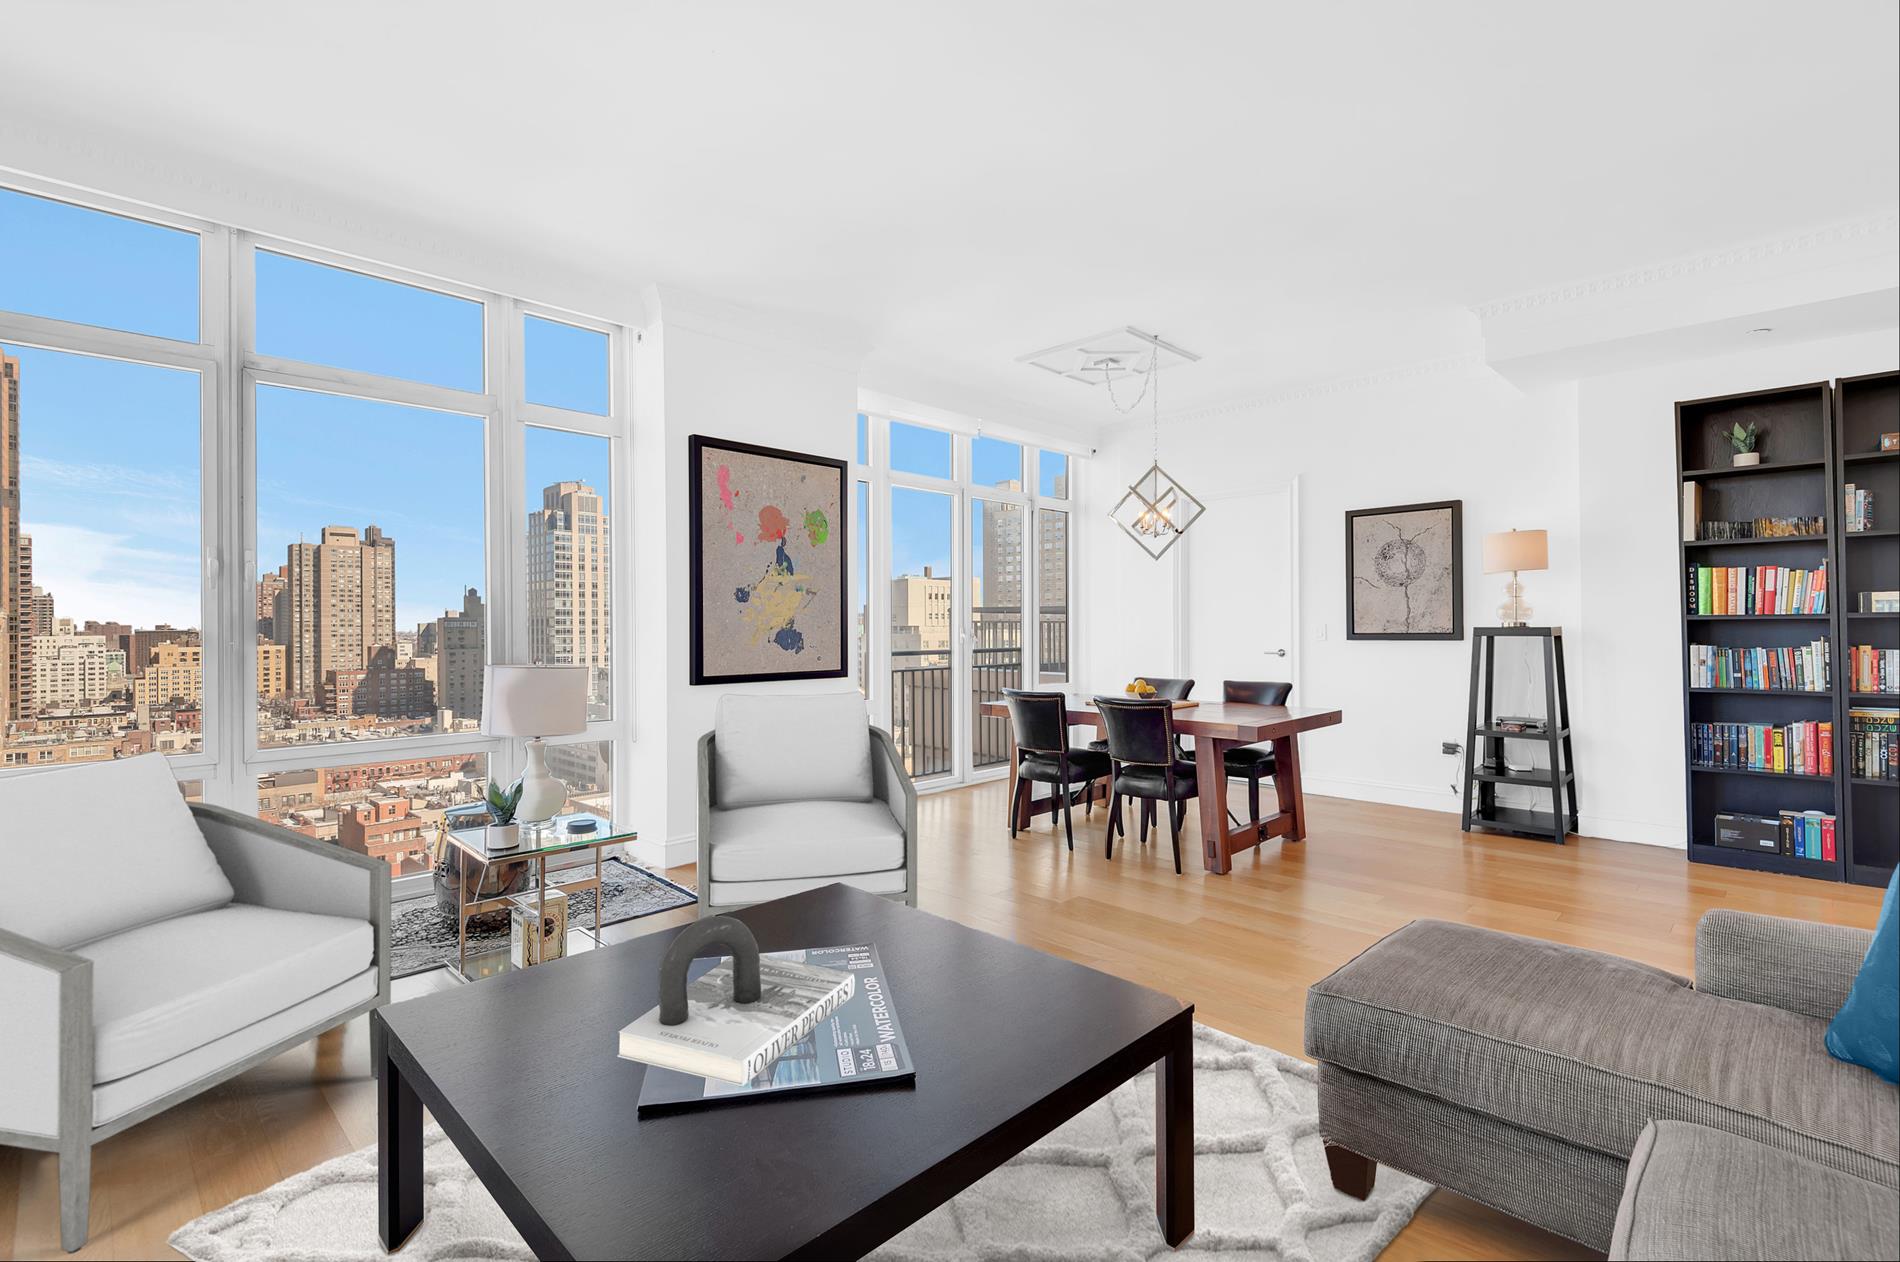 408 East 79th Street 19-A, Upper East Side, Upper East Side, NYC - 2 Bedrooms  
2.5 Bathrooms  
5 Rooms - 